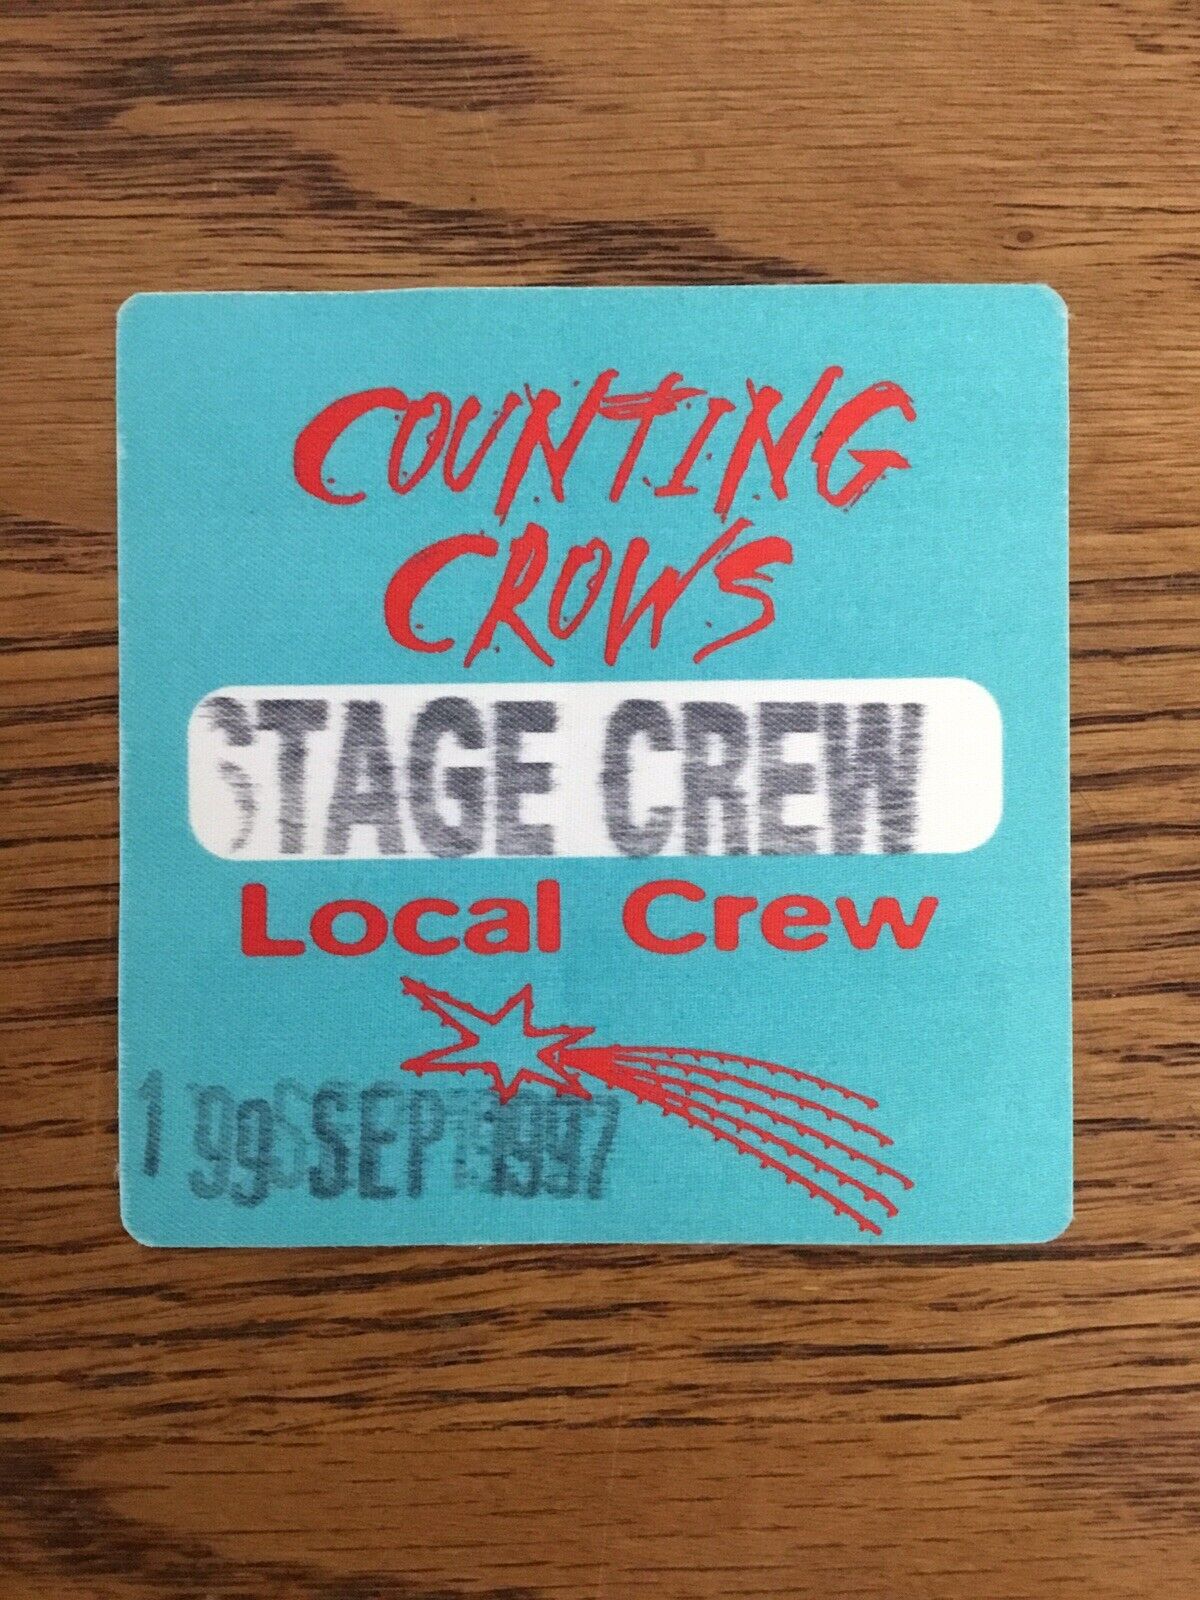 Counting Crows "recovering The Satellites" Tour 1997 Working Backstage Pass